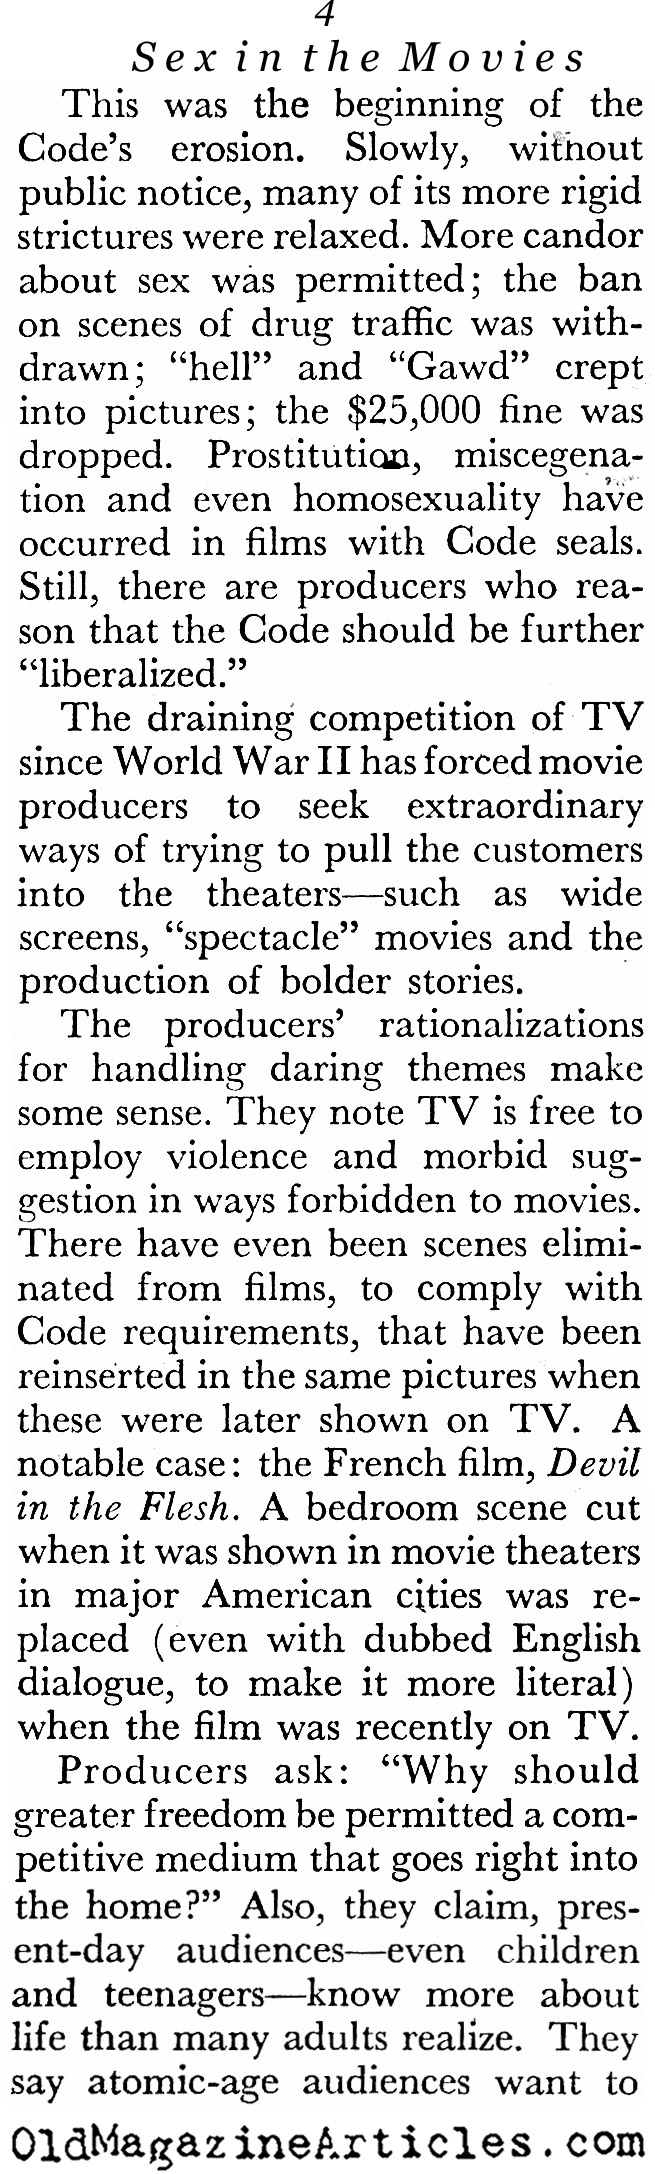 Introducing Sex in the Movies (Coronet Magazine, 1961)